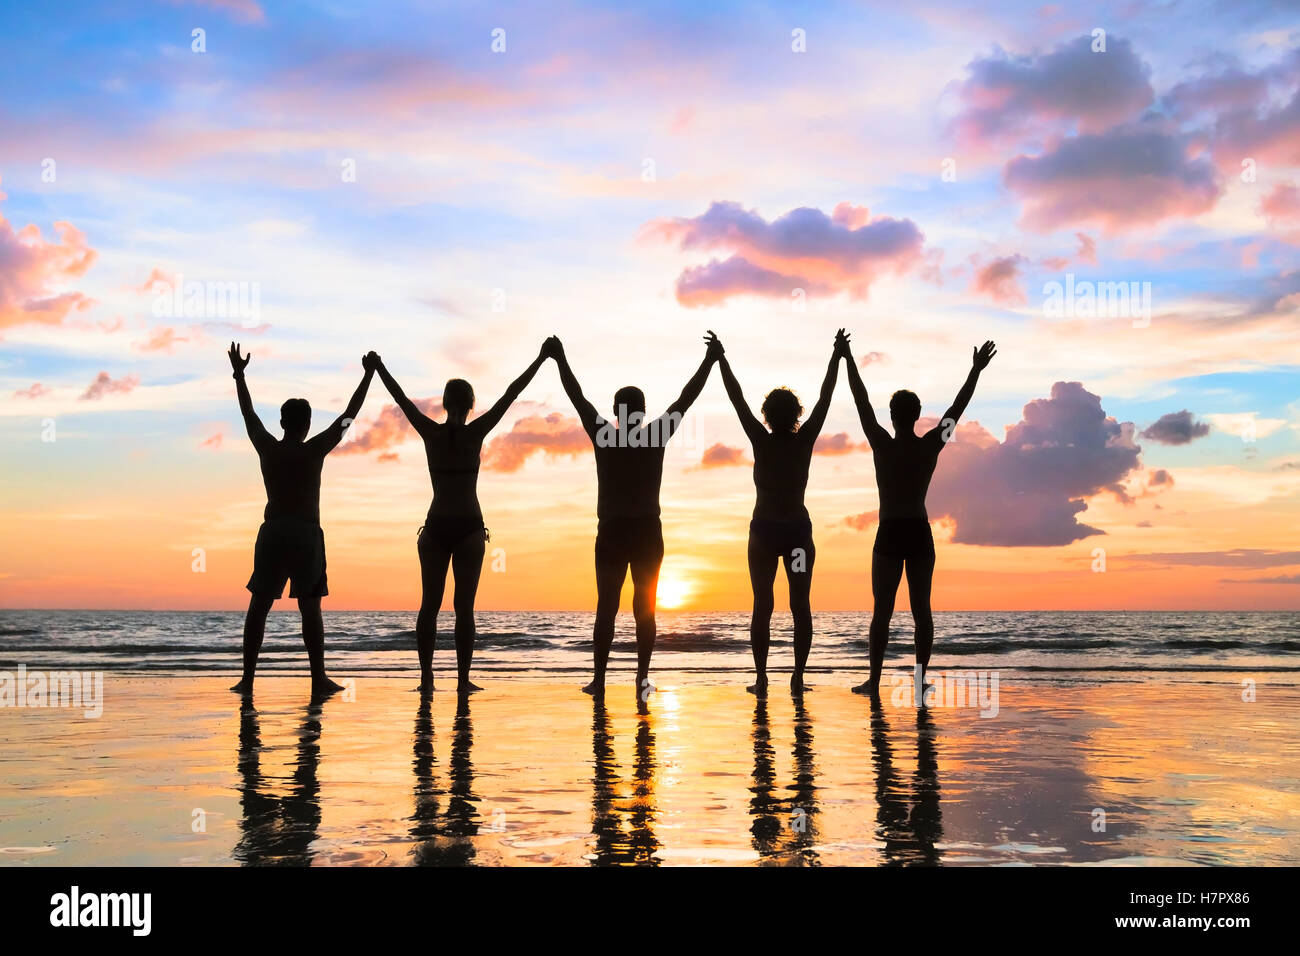 Silhouette of a group of people holding hands up on the beach with a beautiful sunset - concept about teamwork, friendship Stock Photo